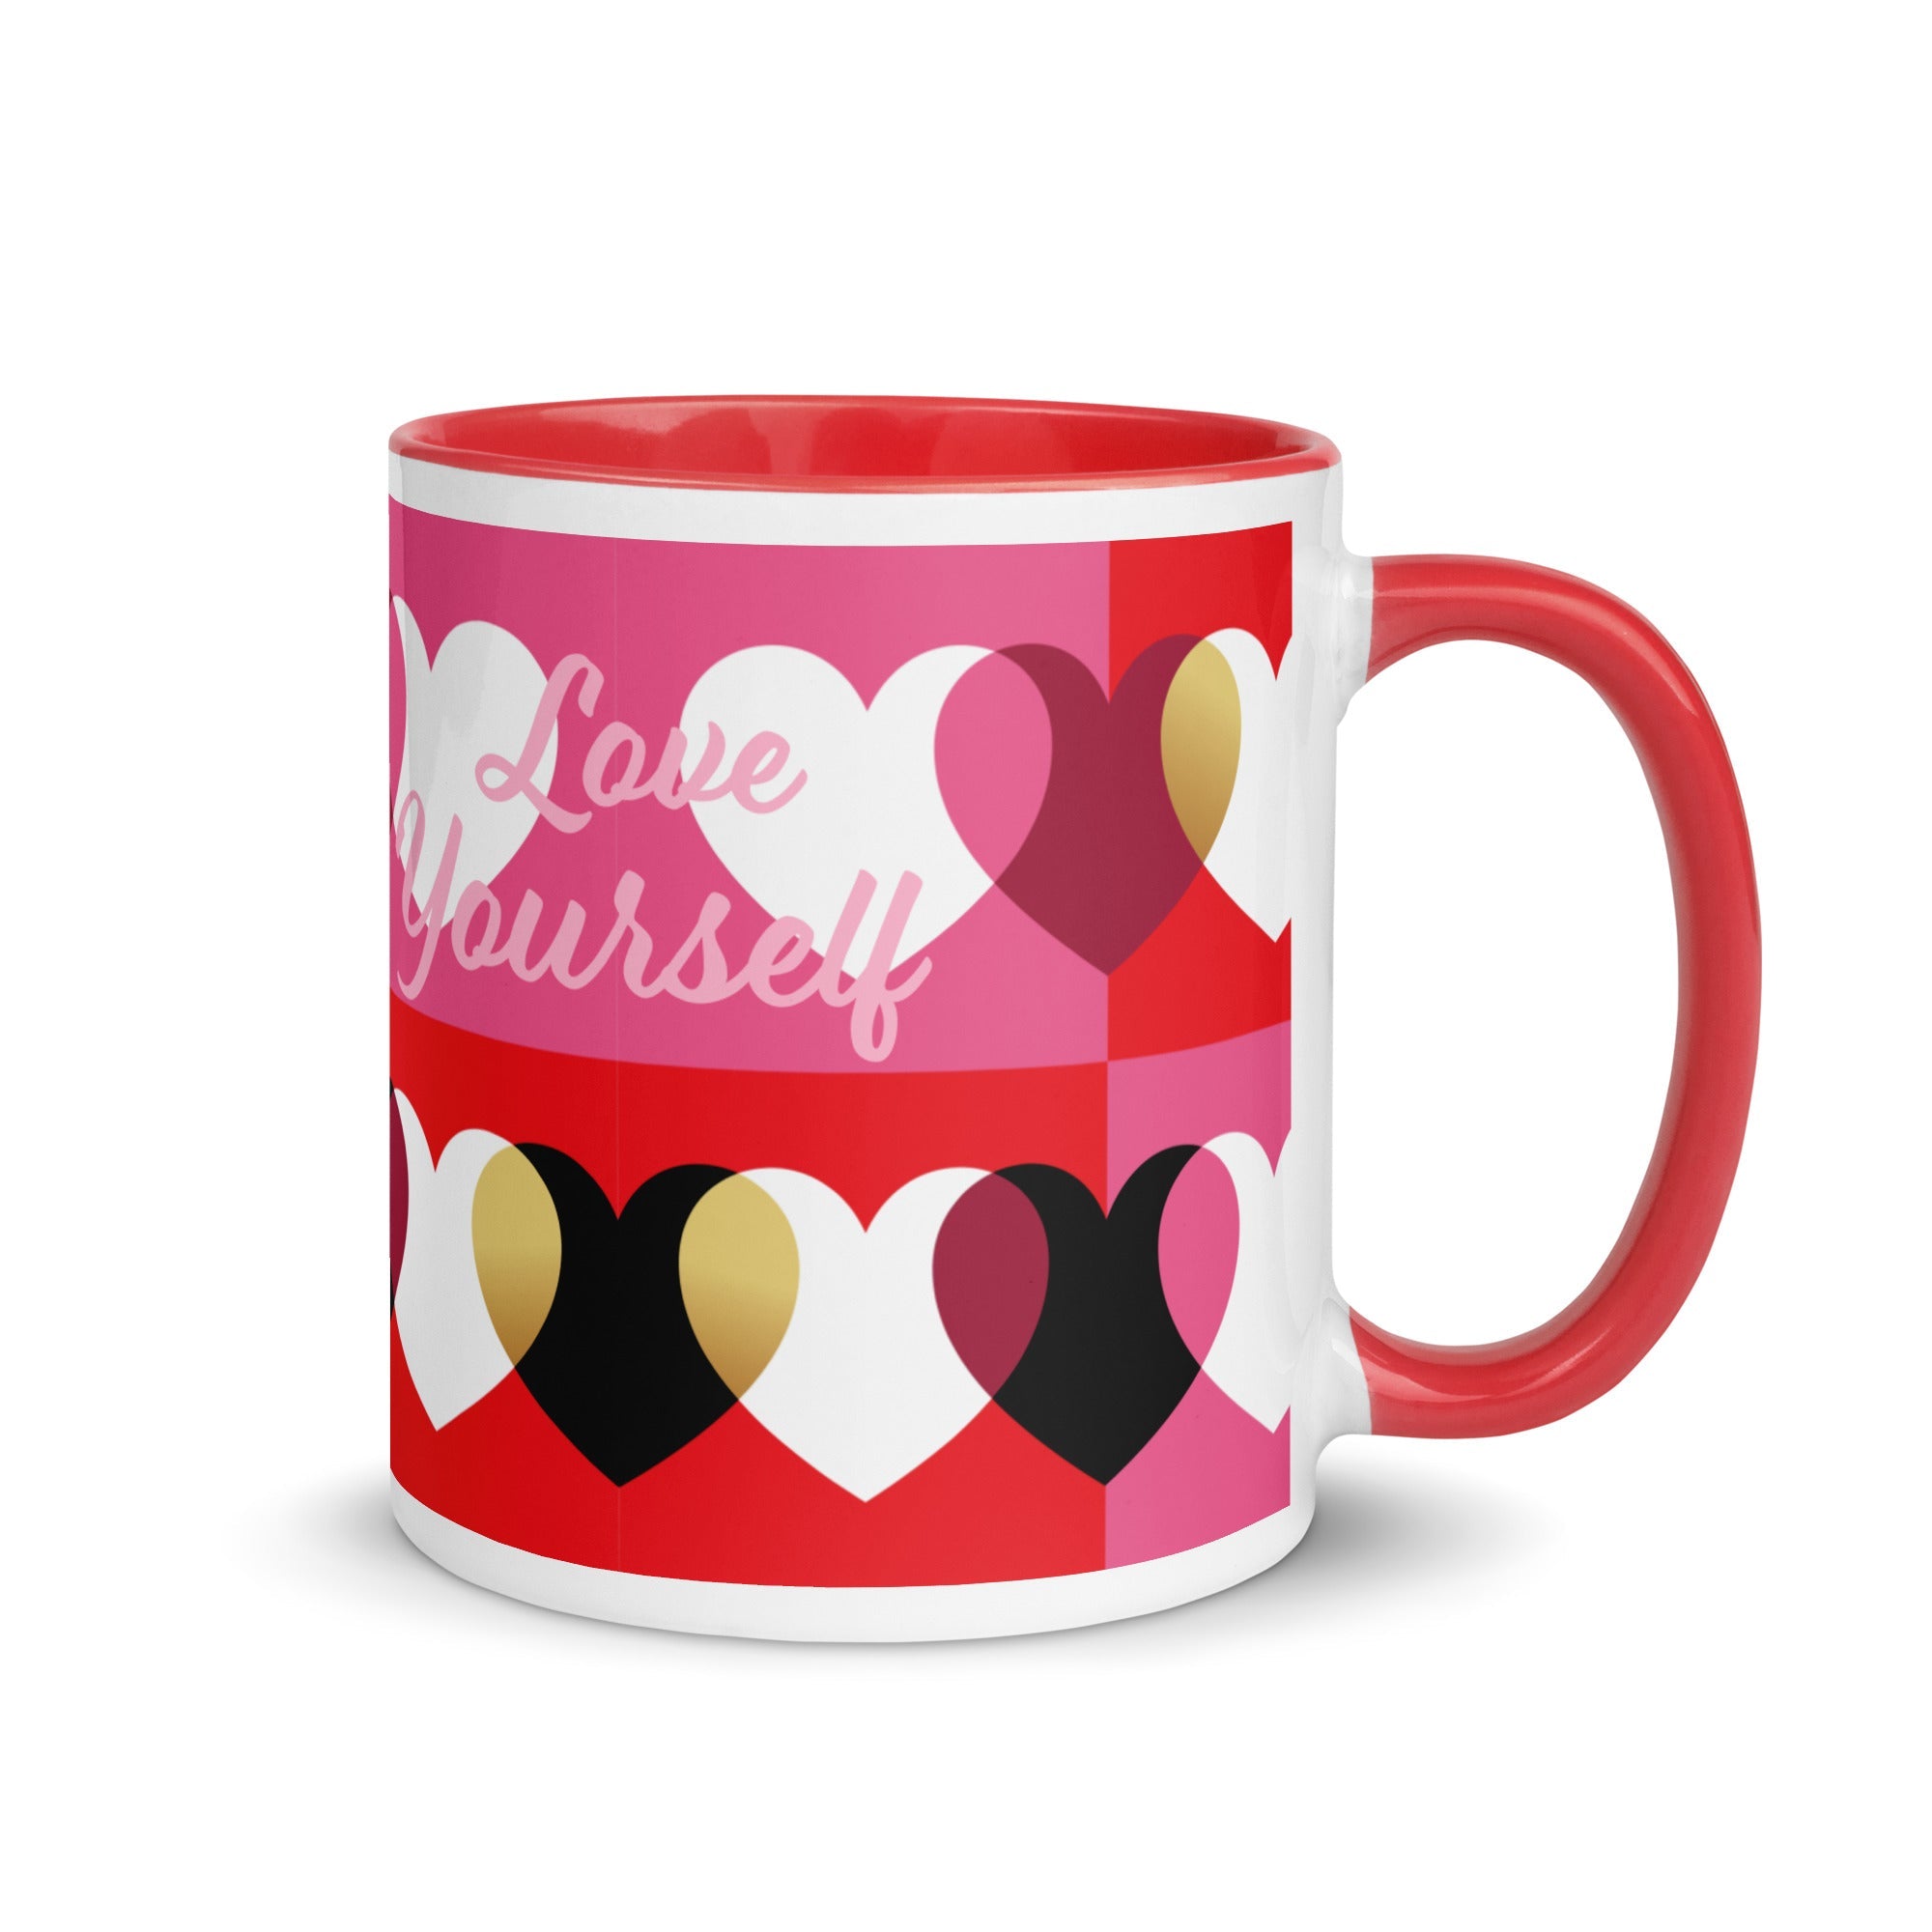 Always & Forever mug with hearts, black, red-14